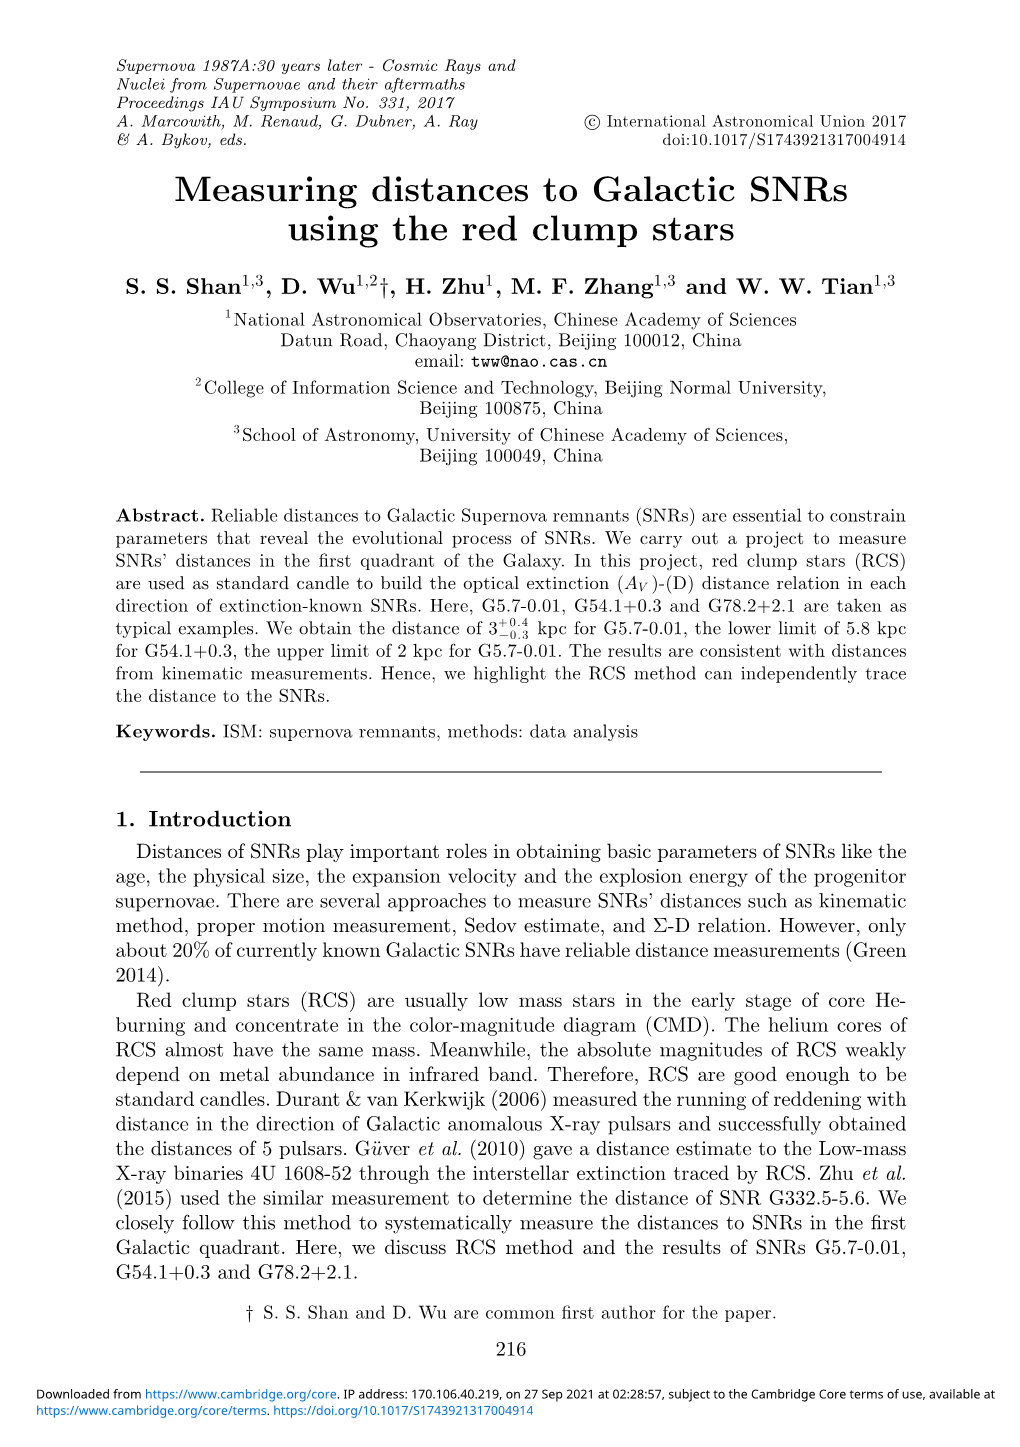 Measuring Distances to Galactic Snrs Using the Red Clump Stars